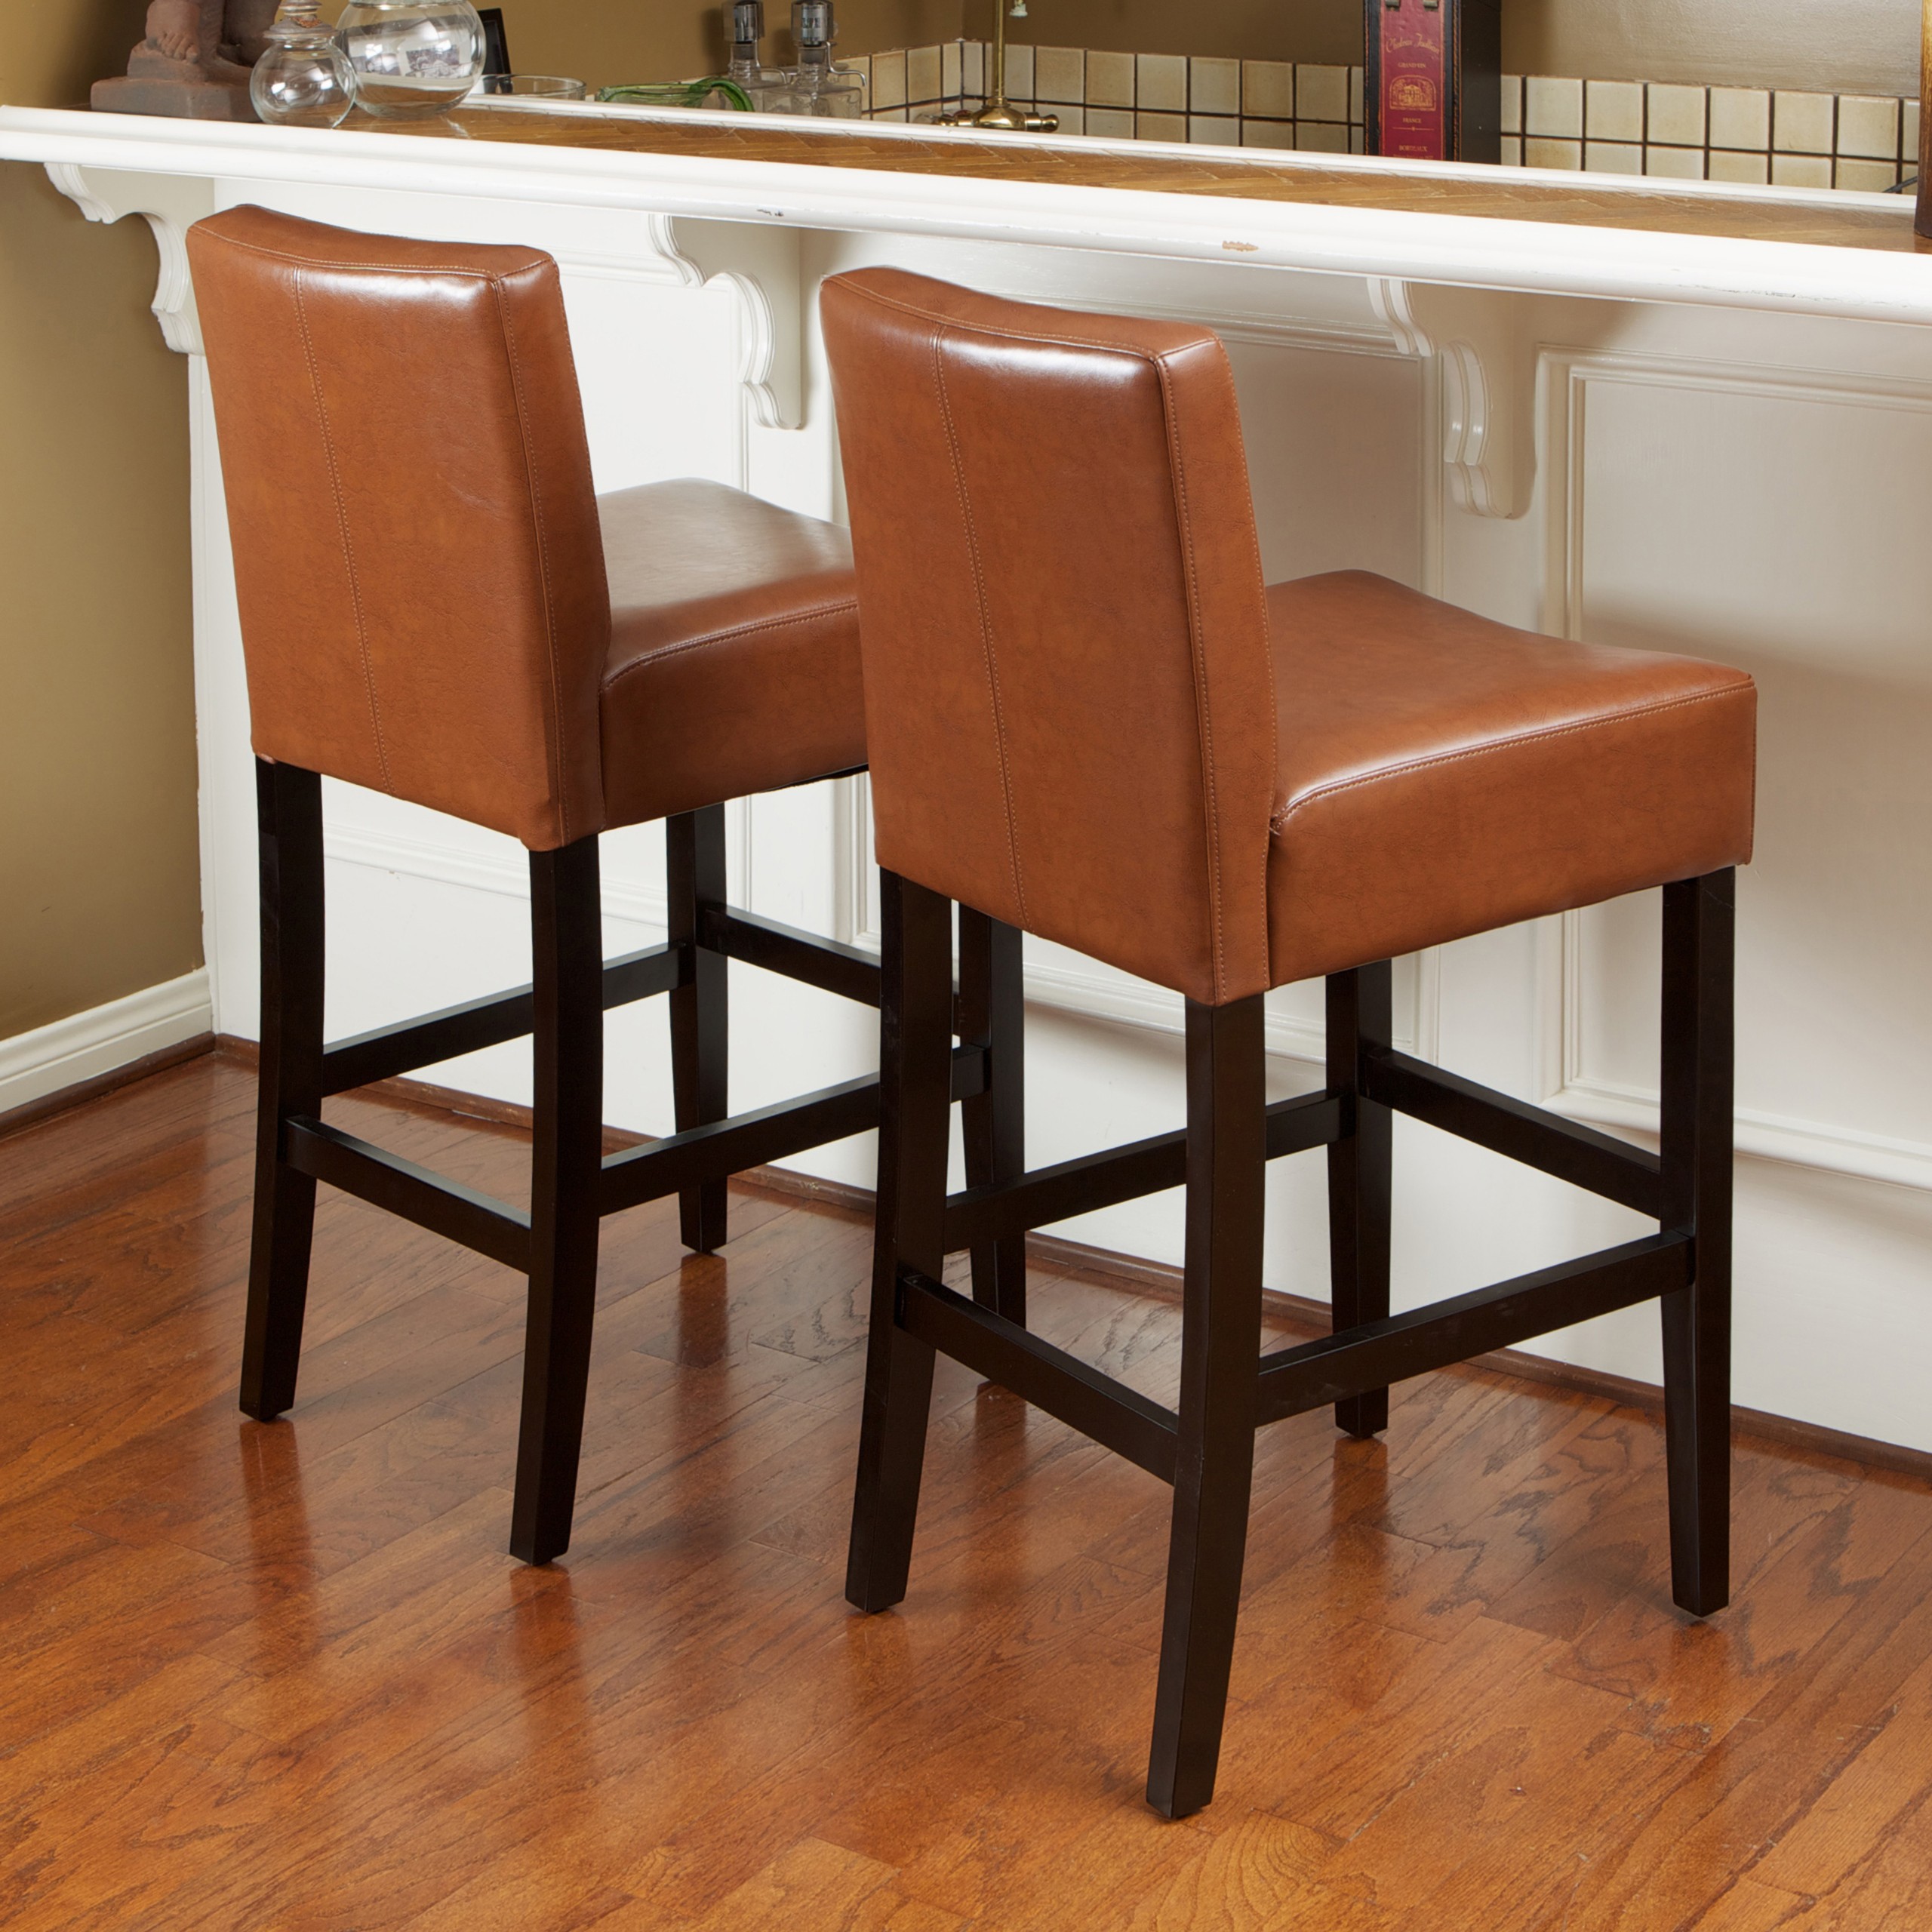 Counter Height Bar Stools Hazelnut Color Leather add Elegance to Kitchen Dining (Set of 2)